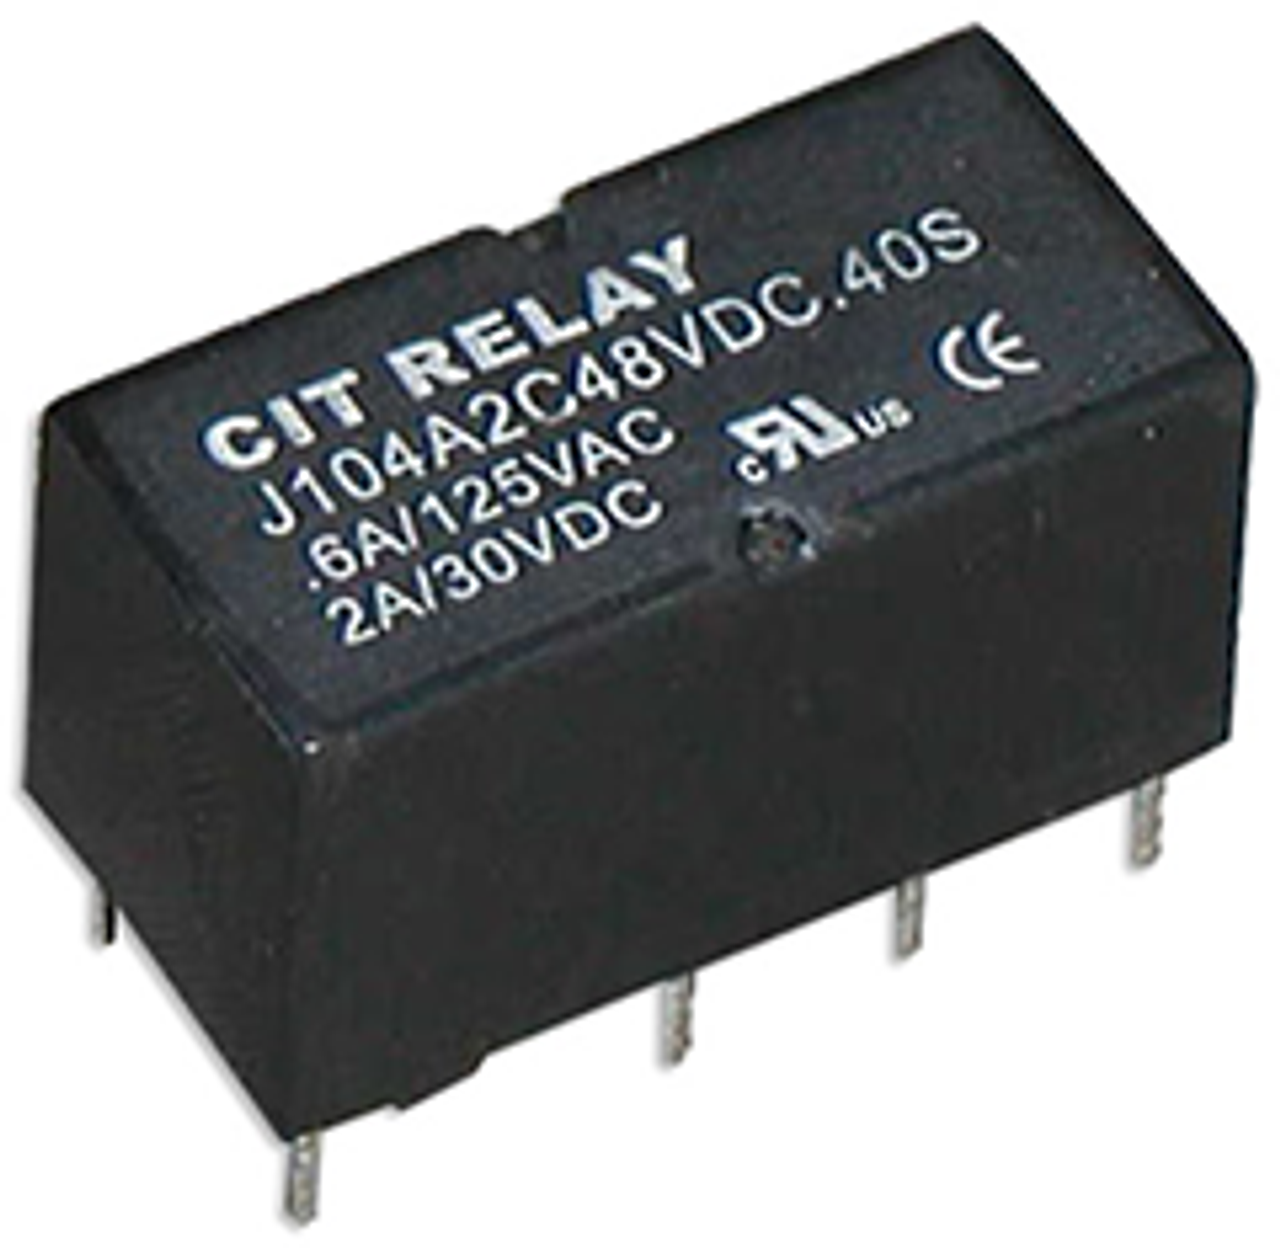 CIT Relay and Switch J104A2C24VDC.40S Power Relays